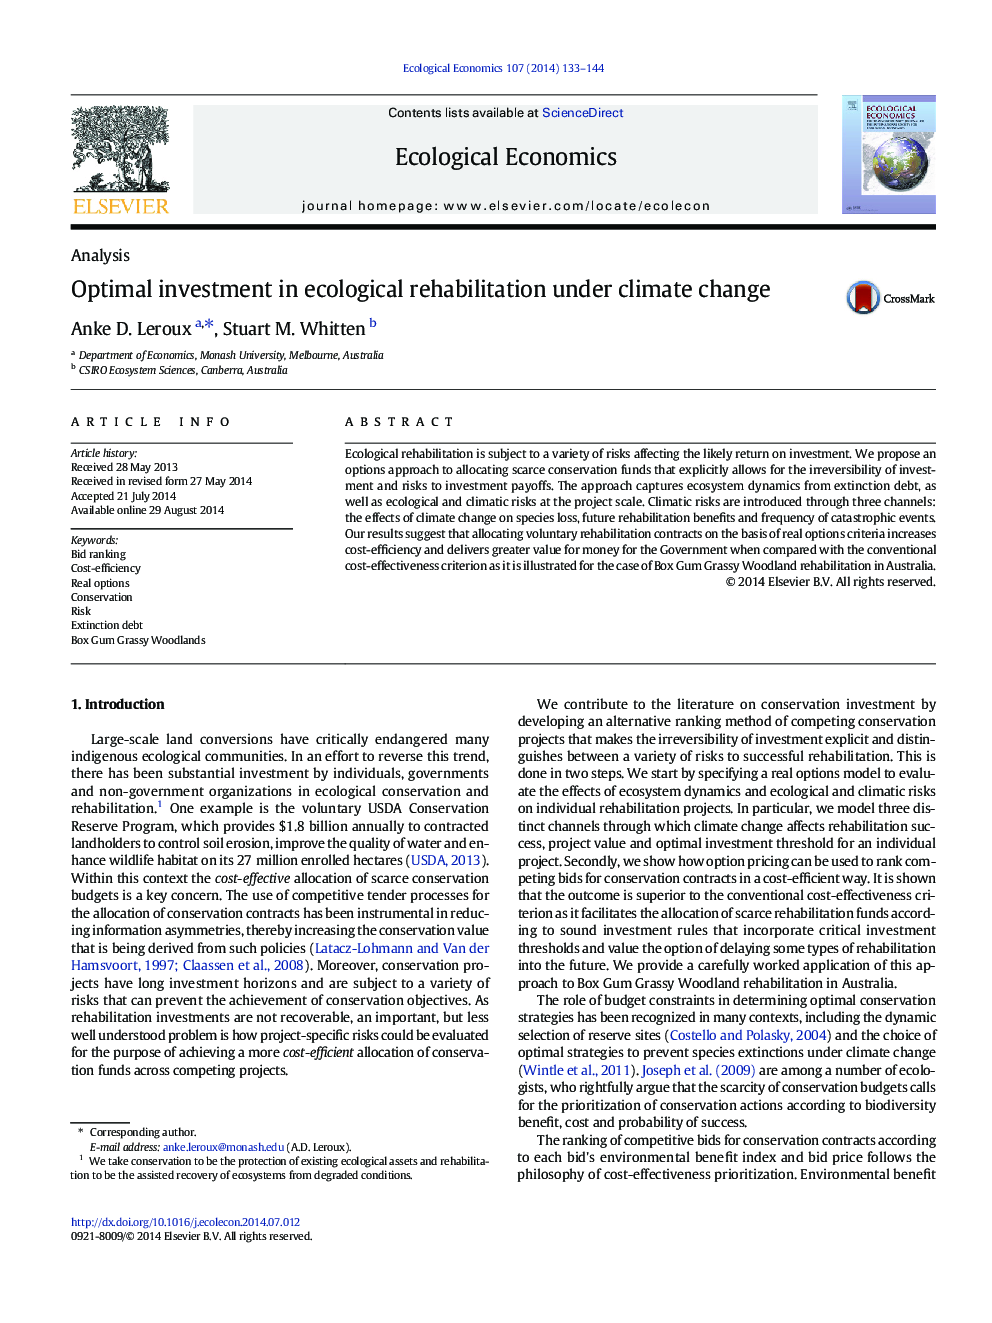 Optimal investment in ecological rehabilitation under climate change